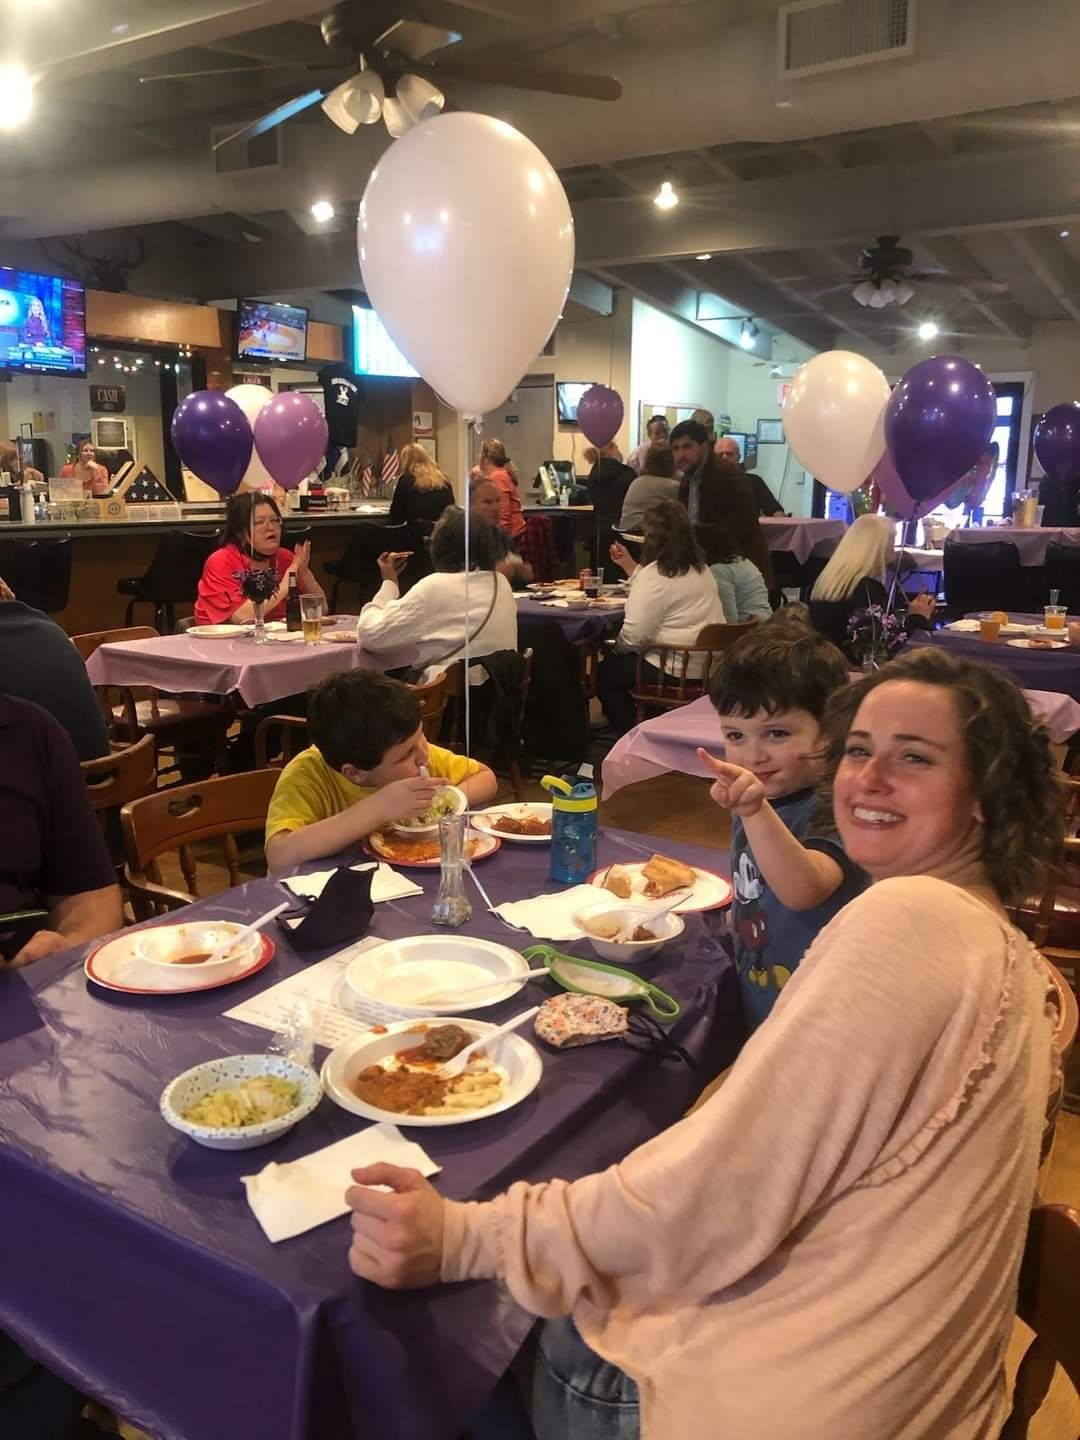 a group of people are sitting at tables with plates of food and balloons